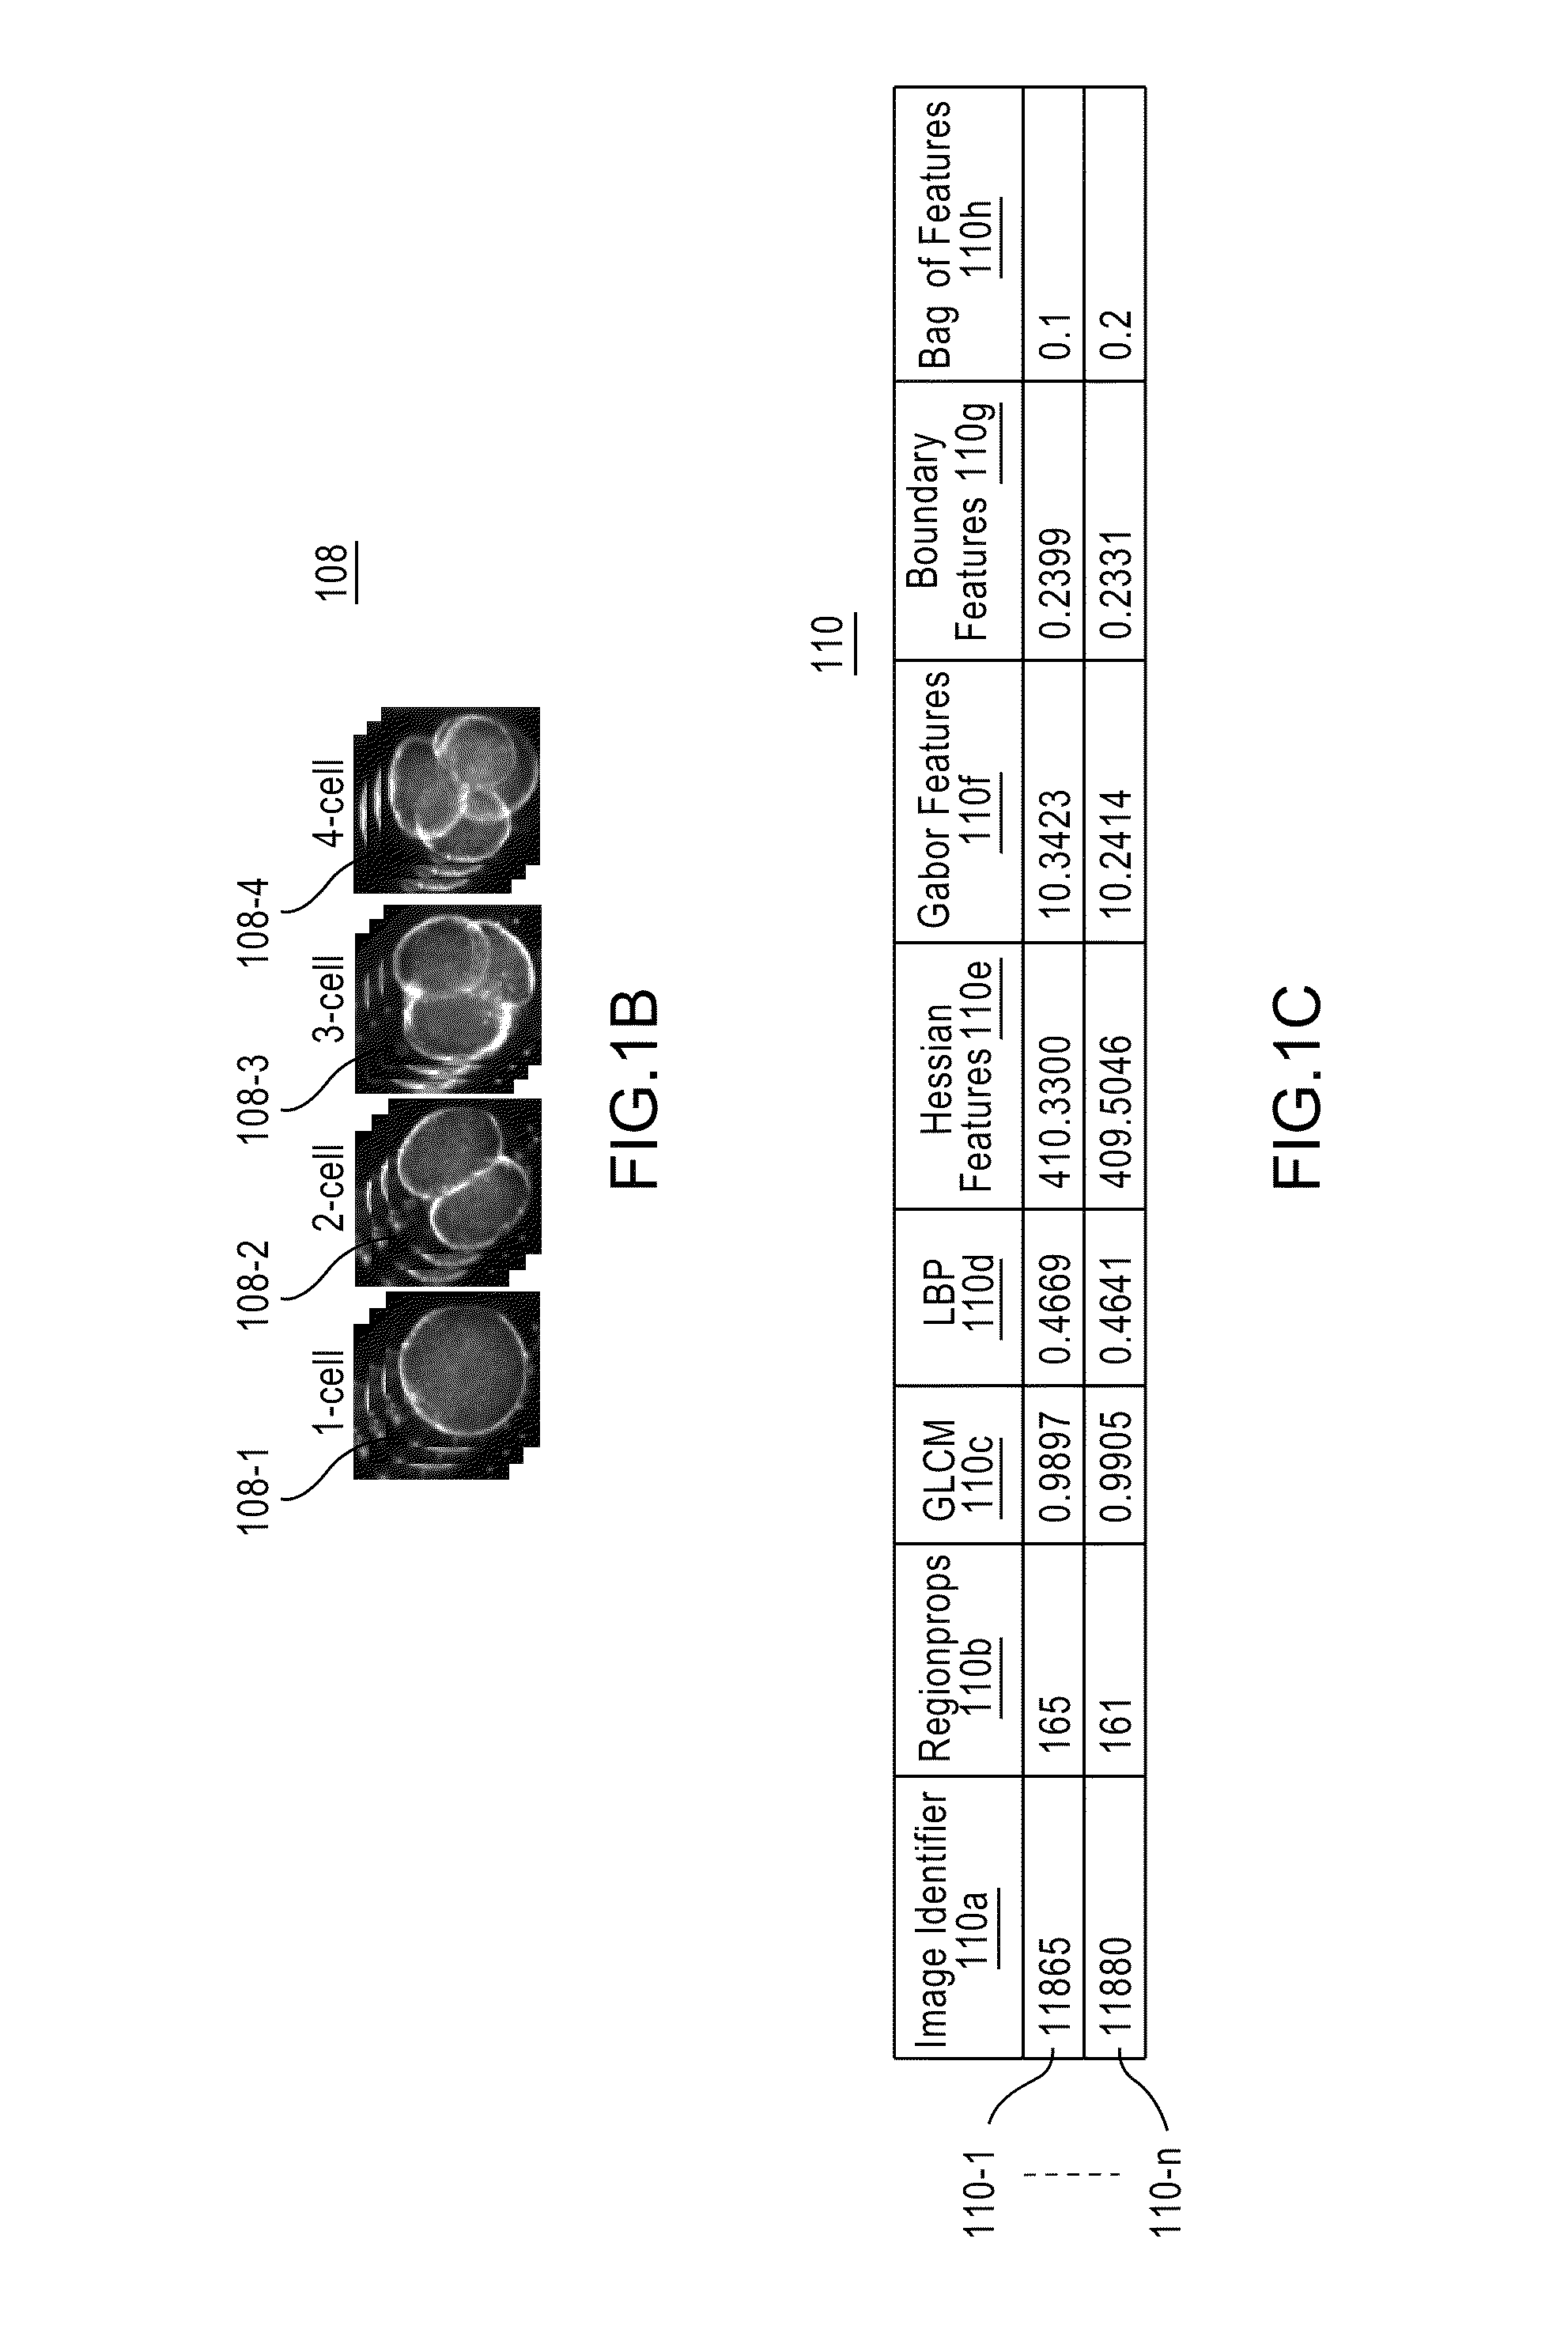 Apparatus, method, and system for image-based human embryo cell classification